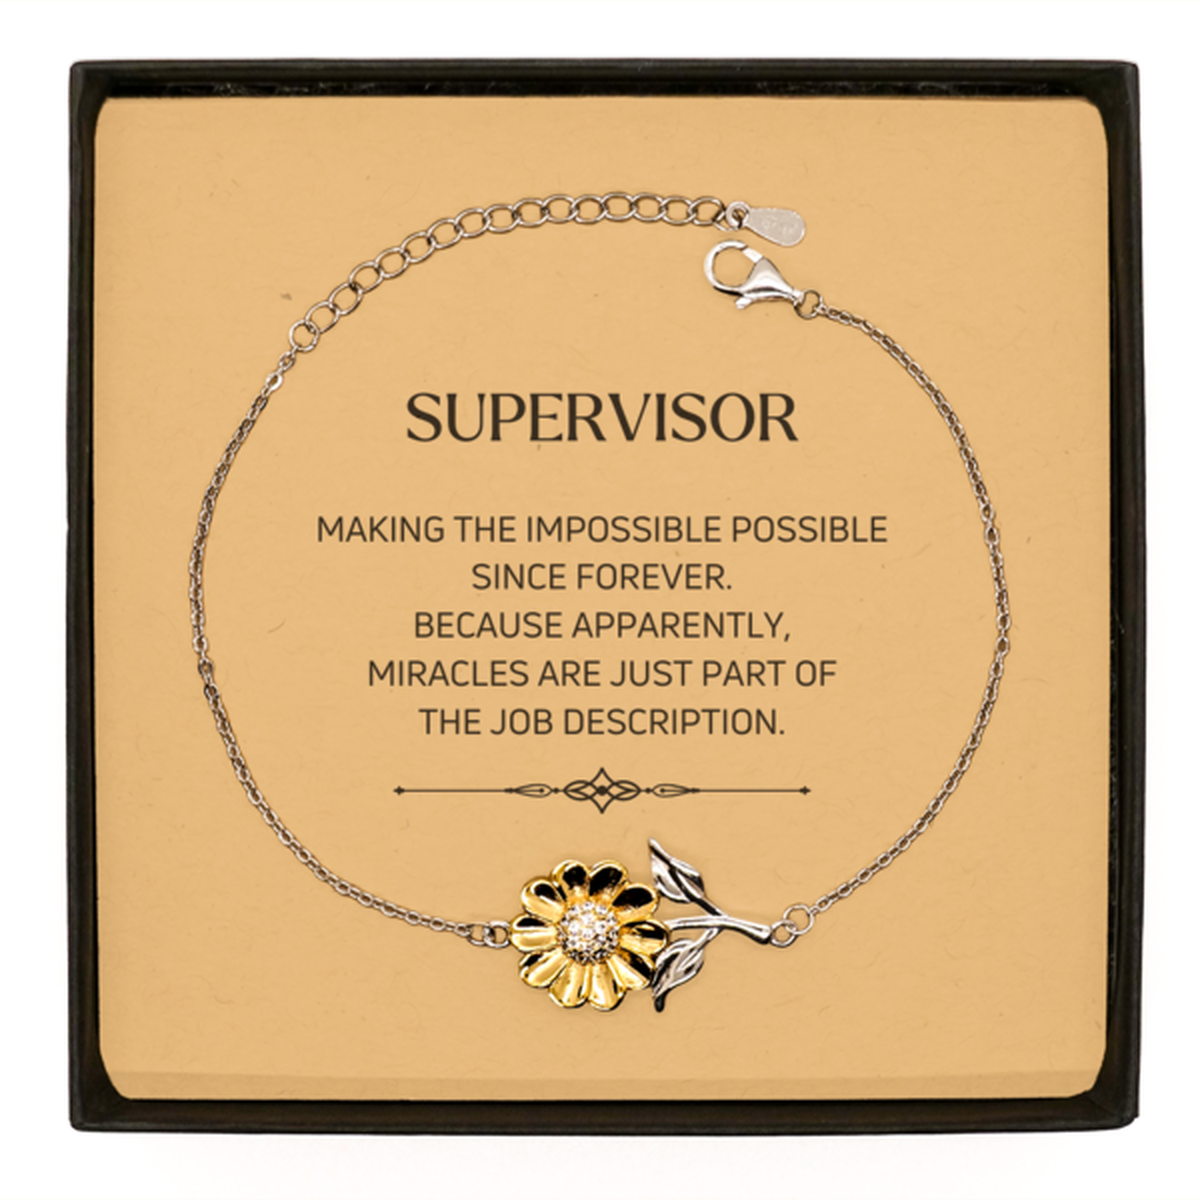 Funny Supervisor Gifts, Miracles are just part of the job description, Inspirational Birthday Sunflower Bracelet For Supervisor, Men, Women, Coworkers, Friends, Boss